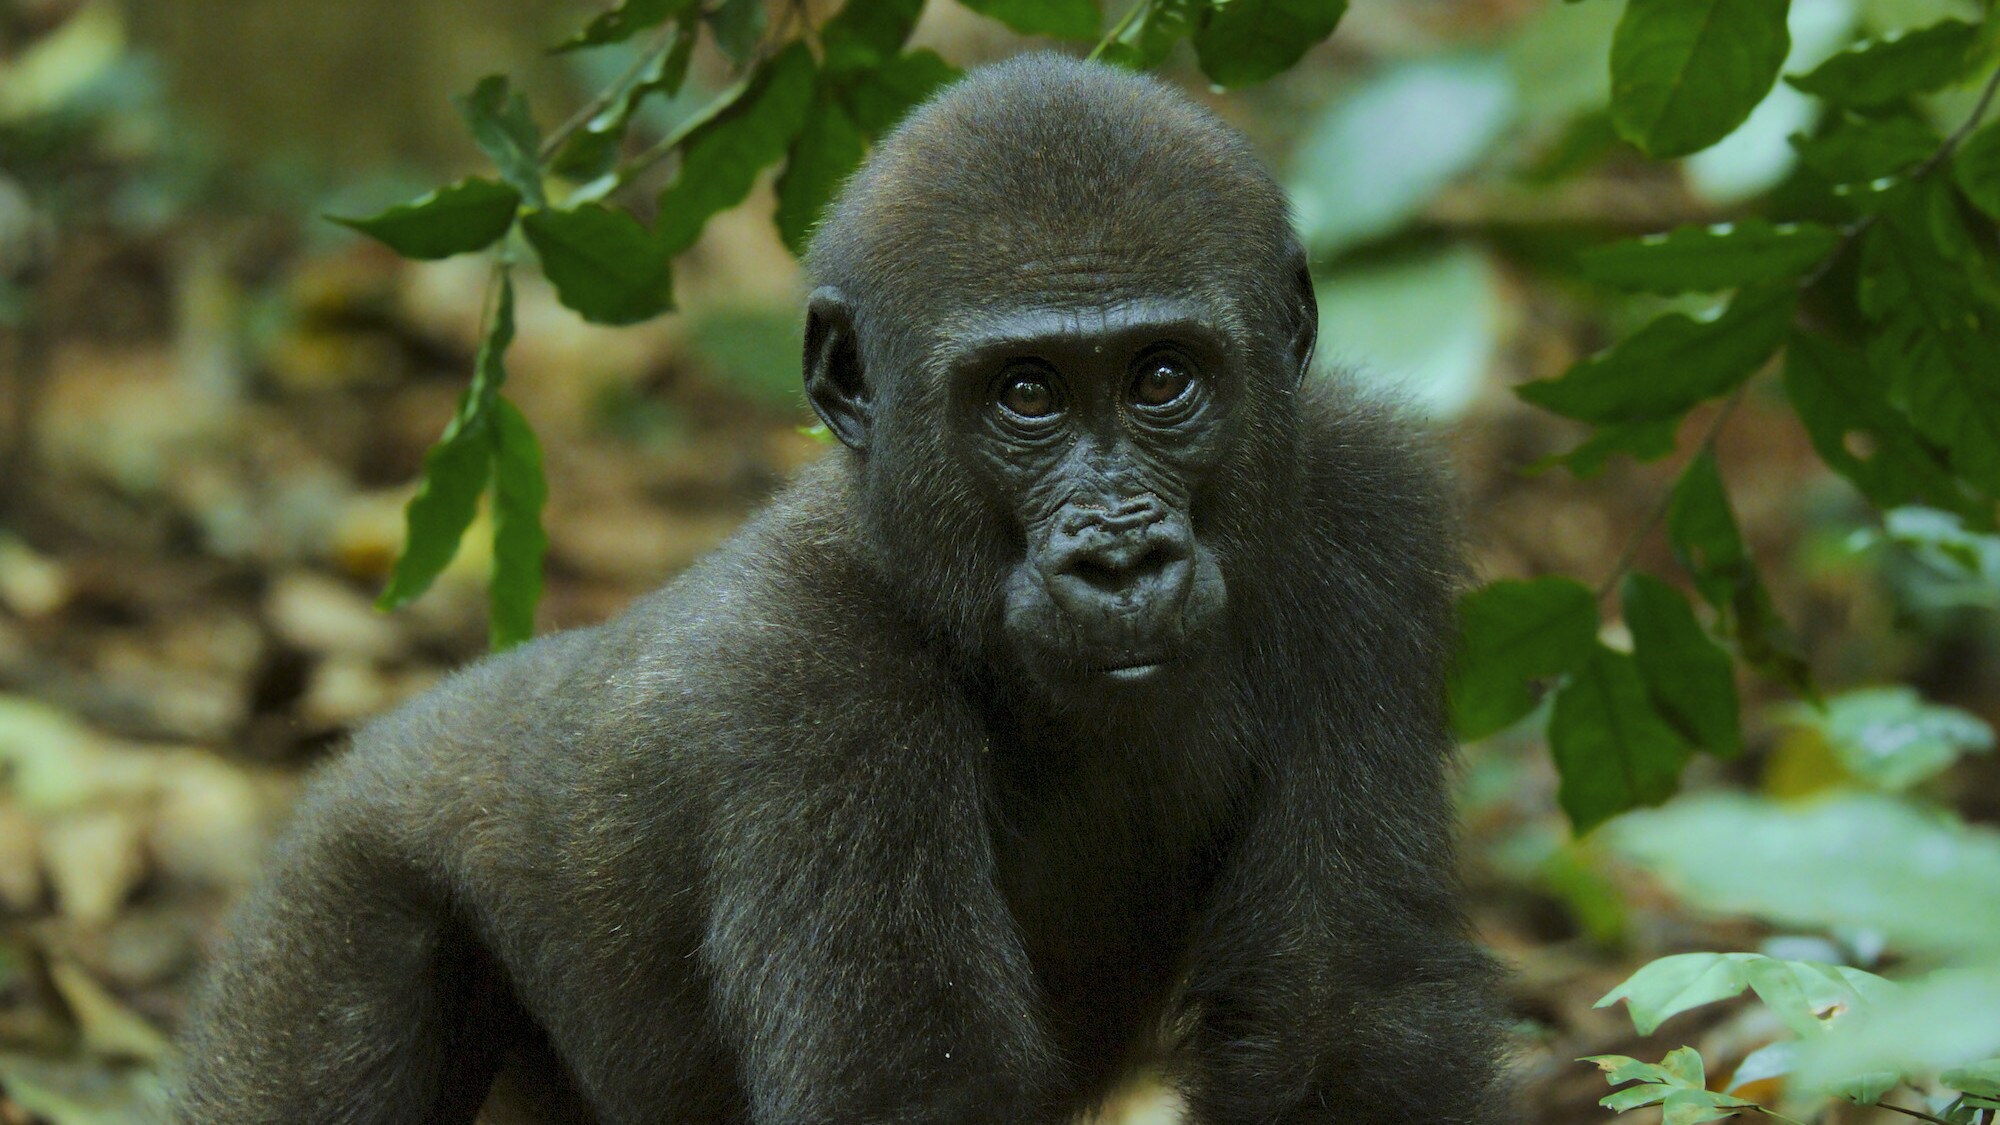 A baby Gorilla. (National Geographic for Disney+/Bertie Gregory)